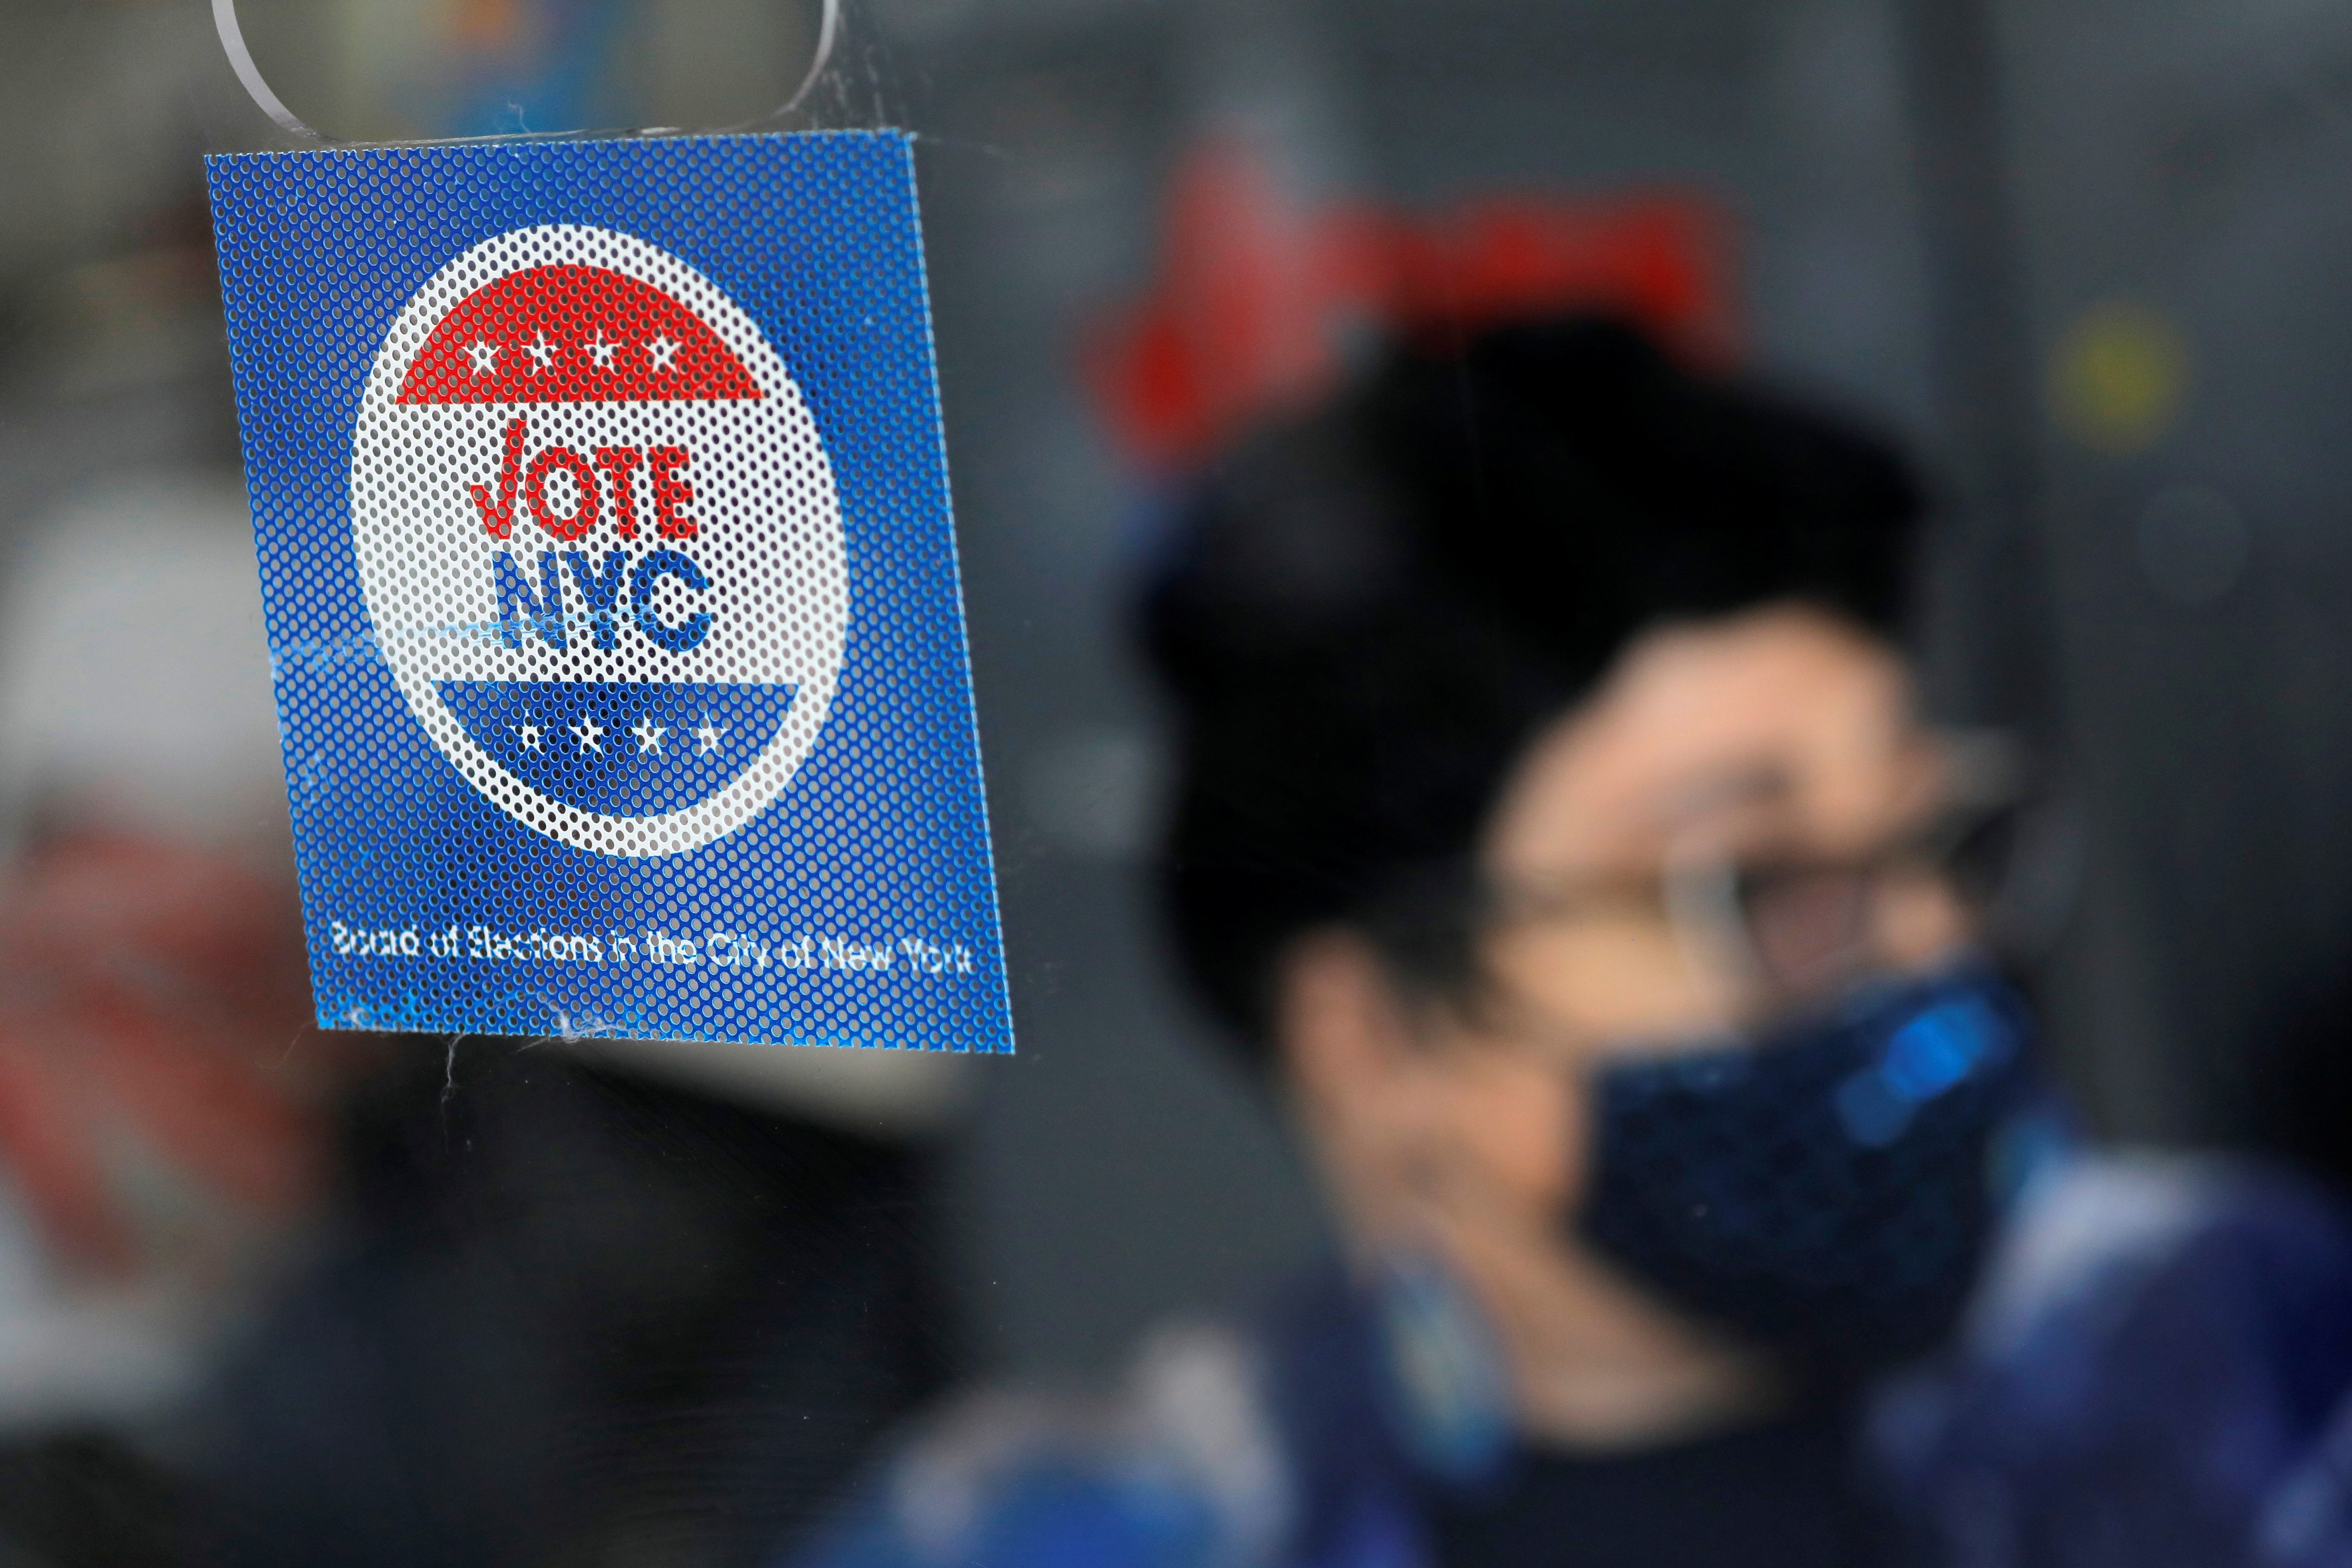 New York City’s Democratic primary election ends on 22 June.